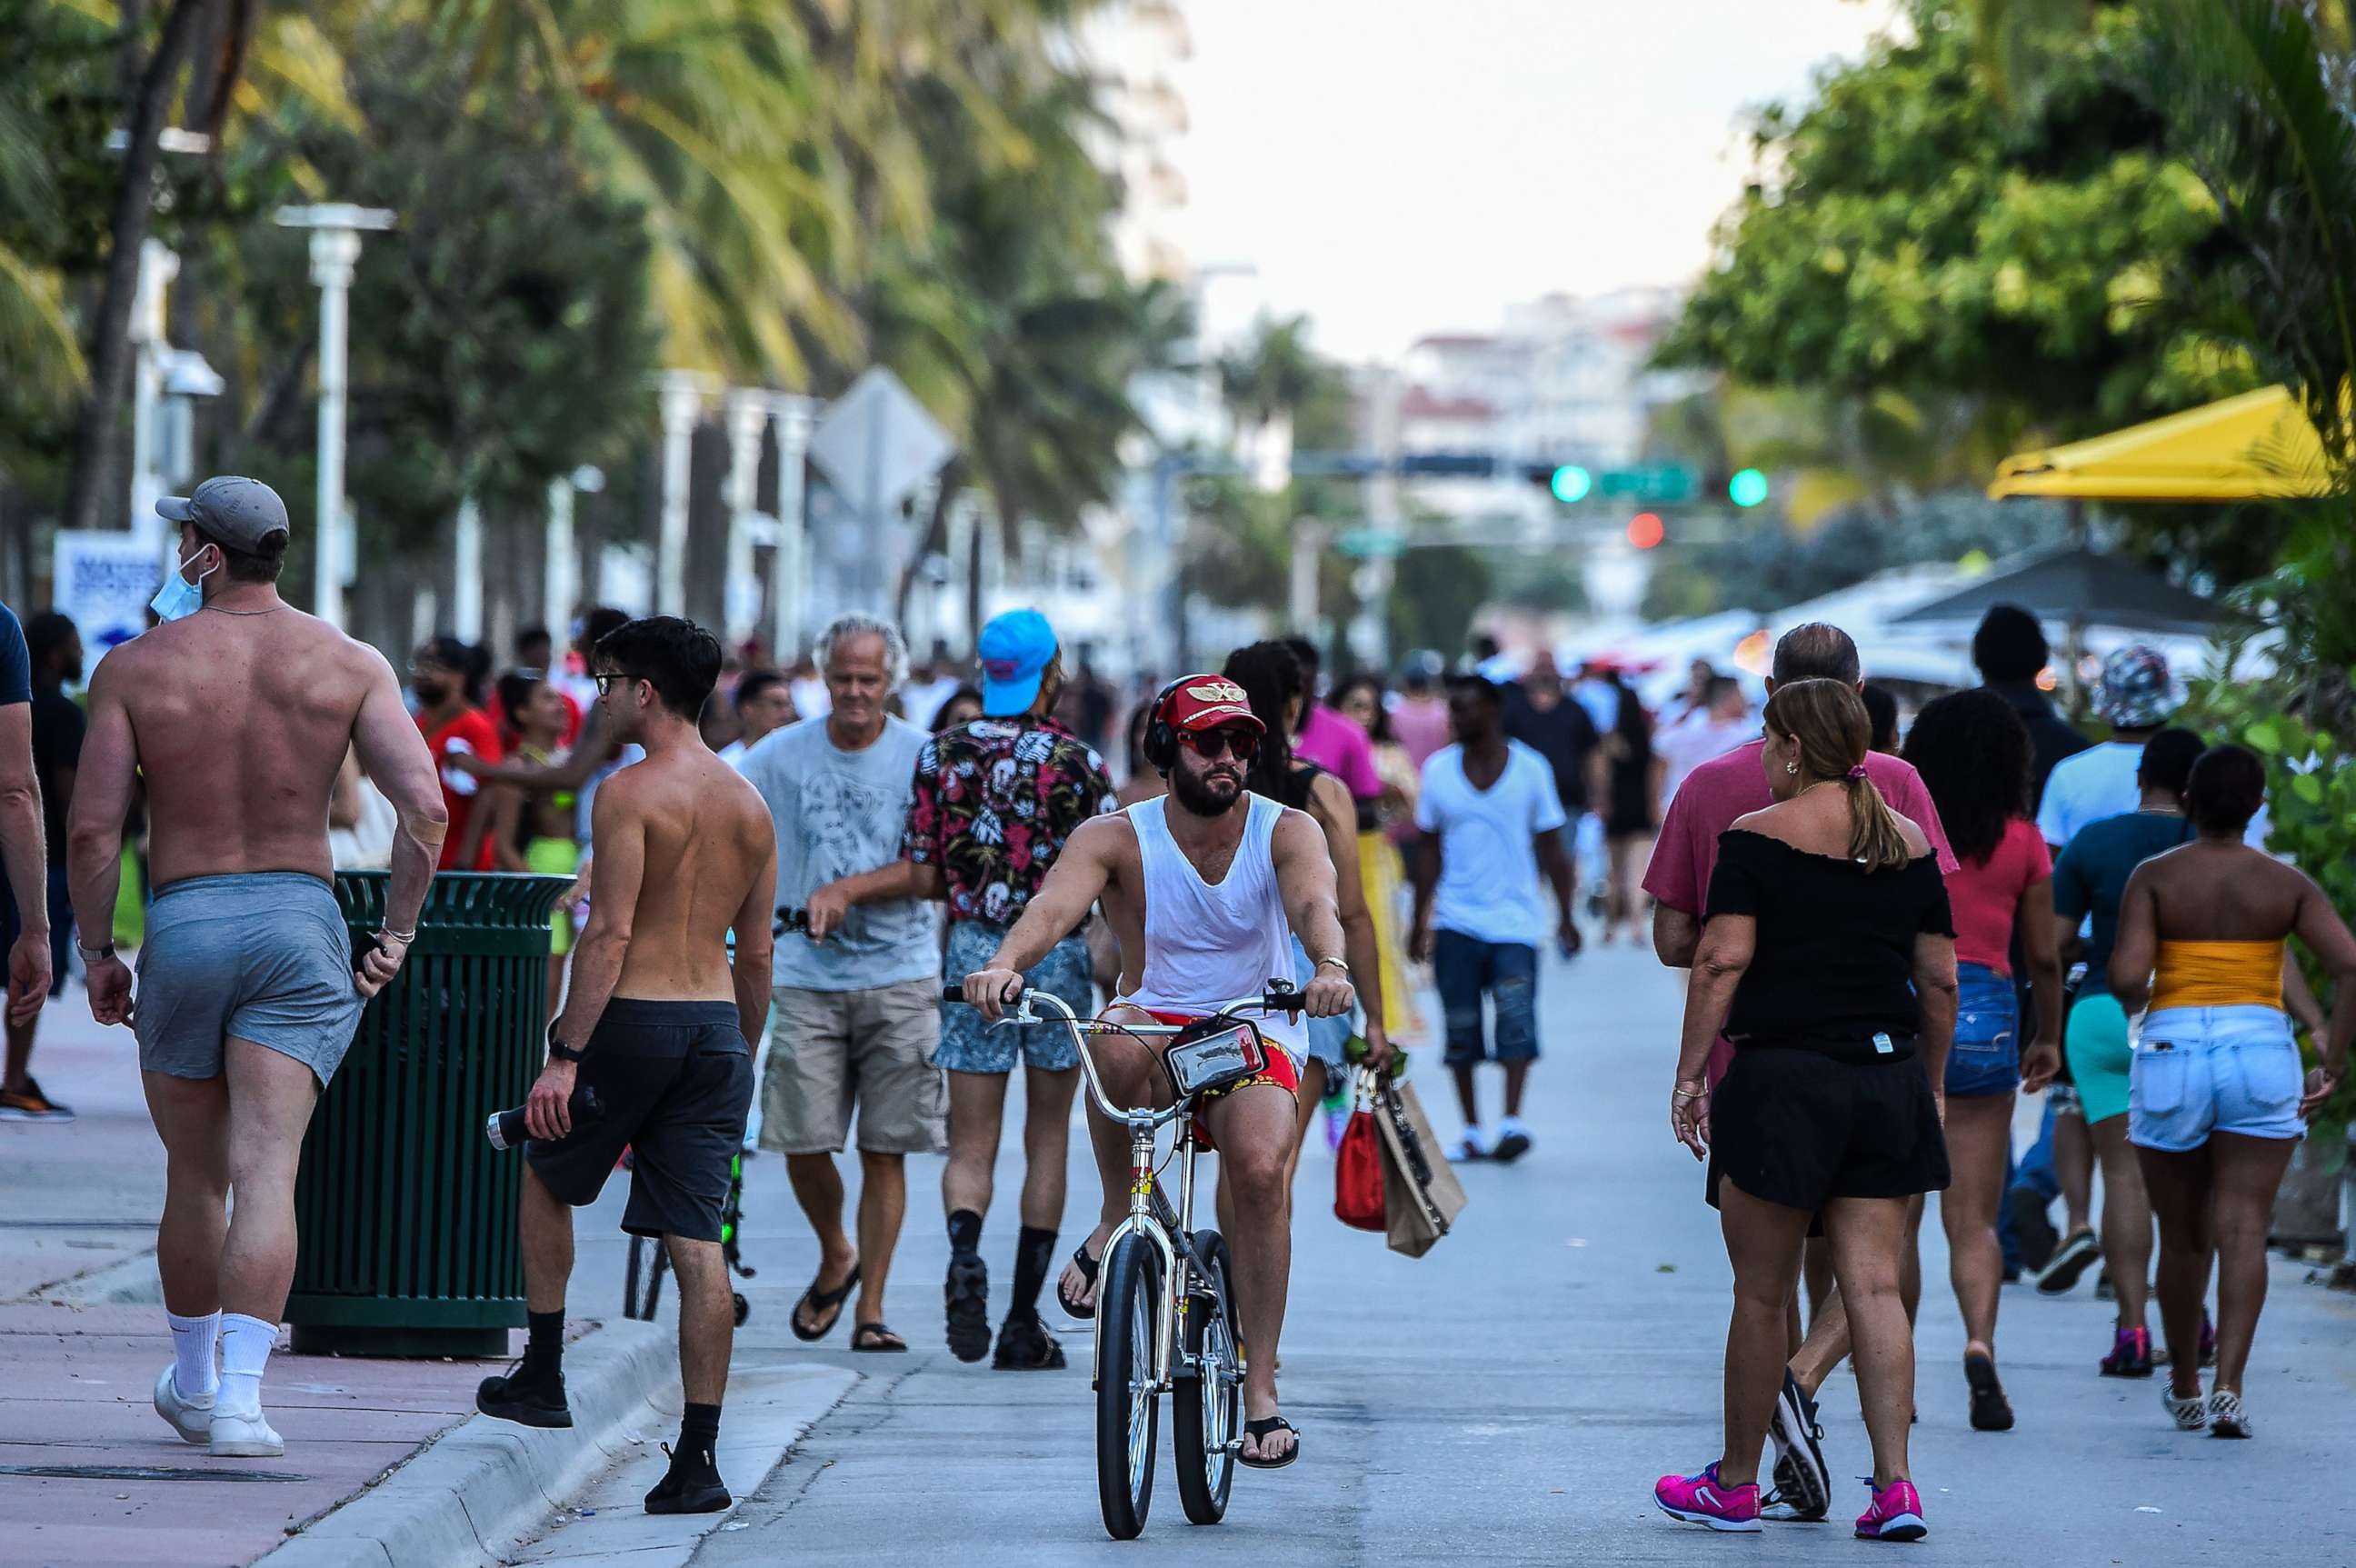 PHOTO: A man rides a bicycle as people walk on Ocean Drive in Miami Beach, Fla. on June 26, 2020.